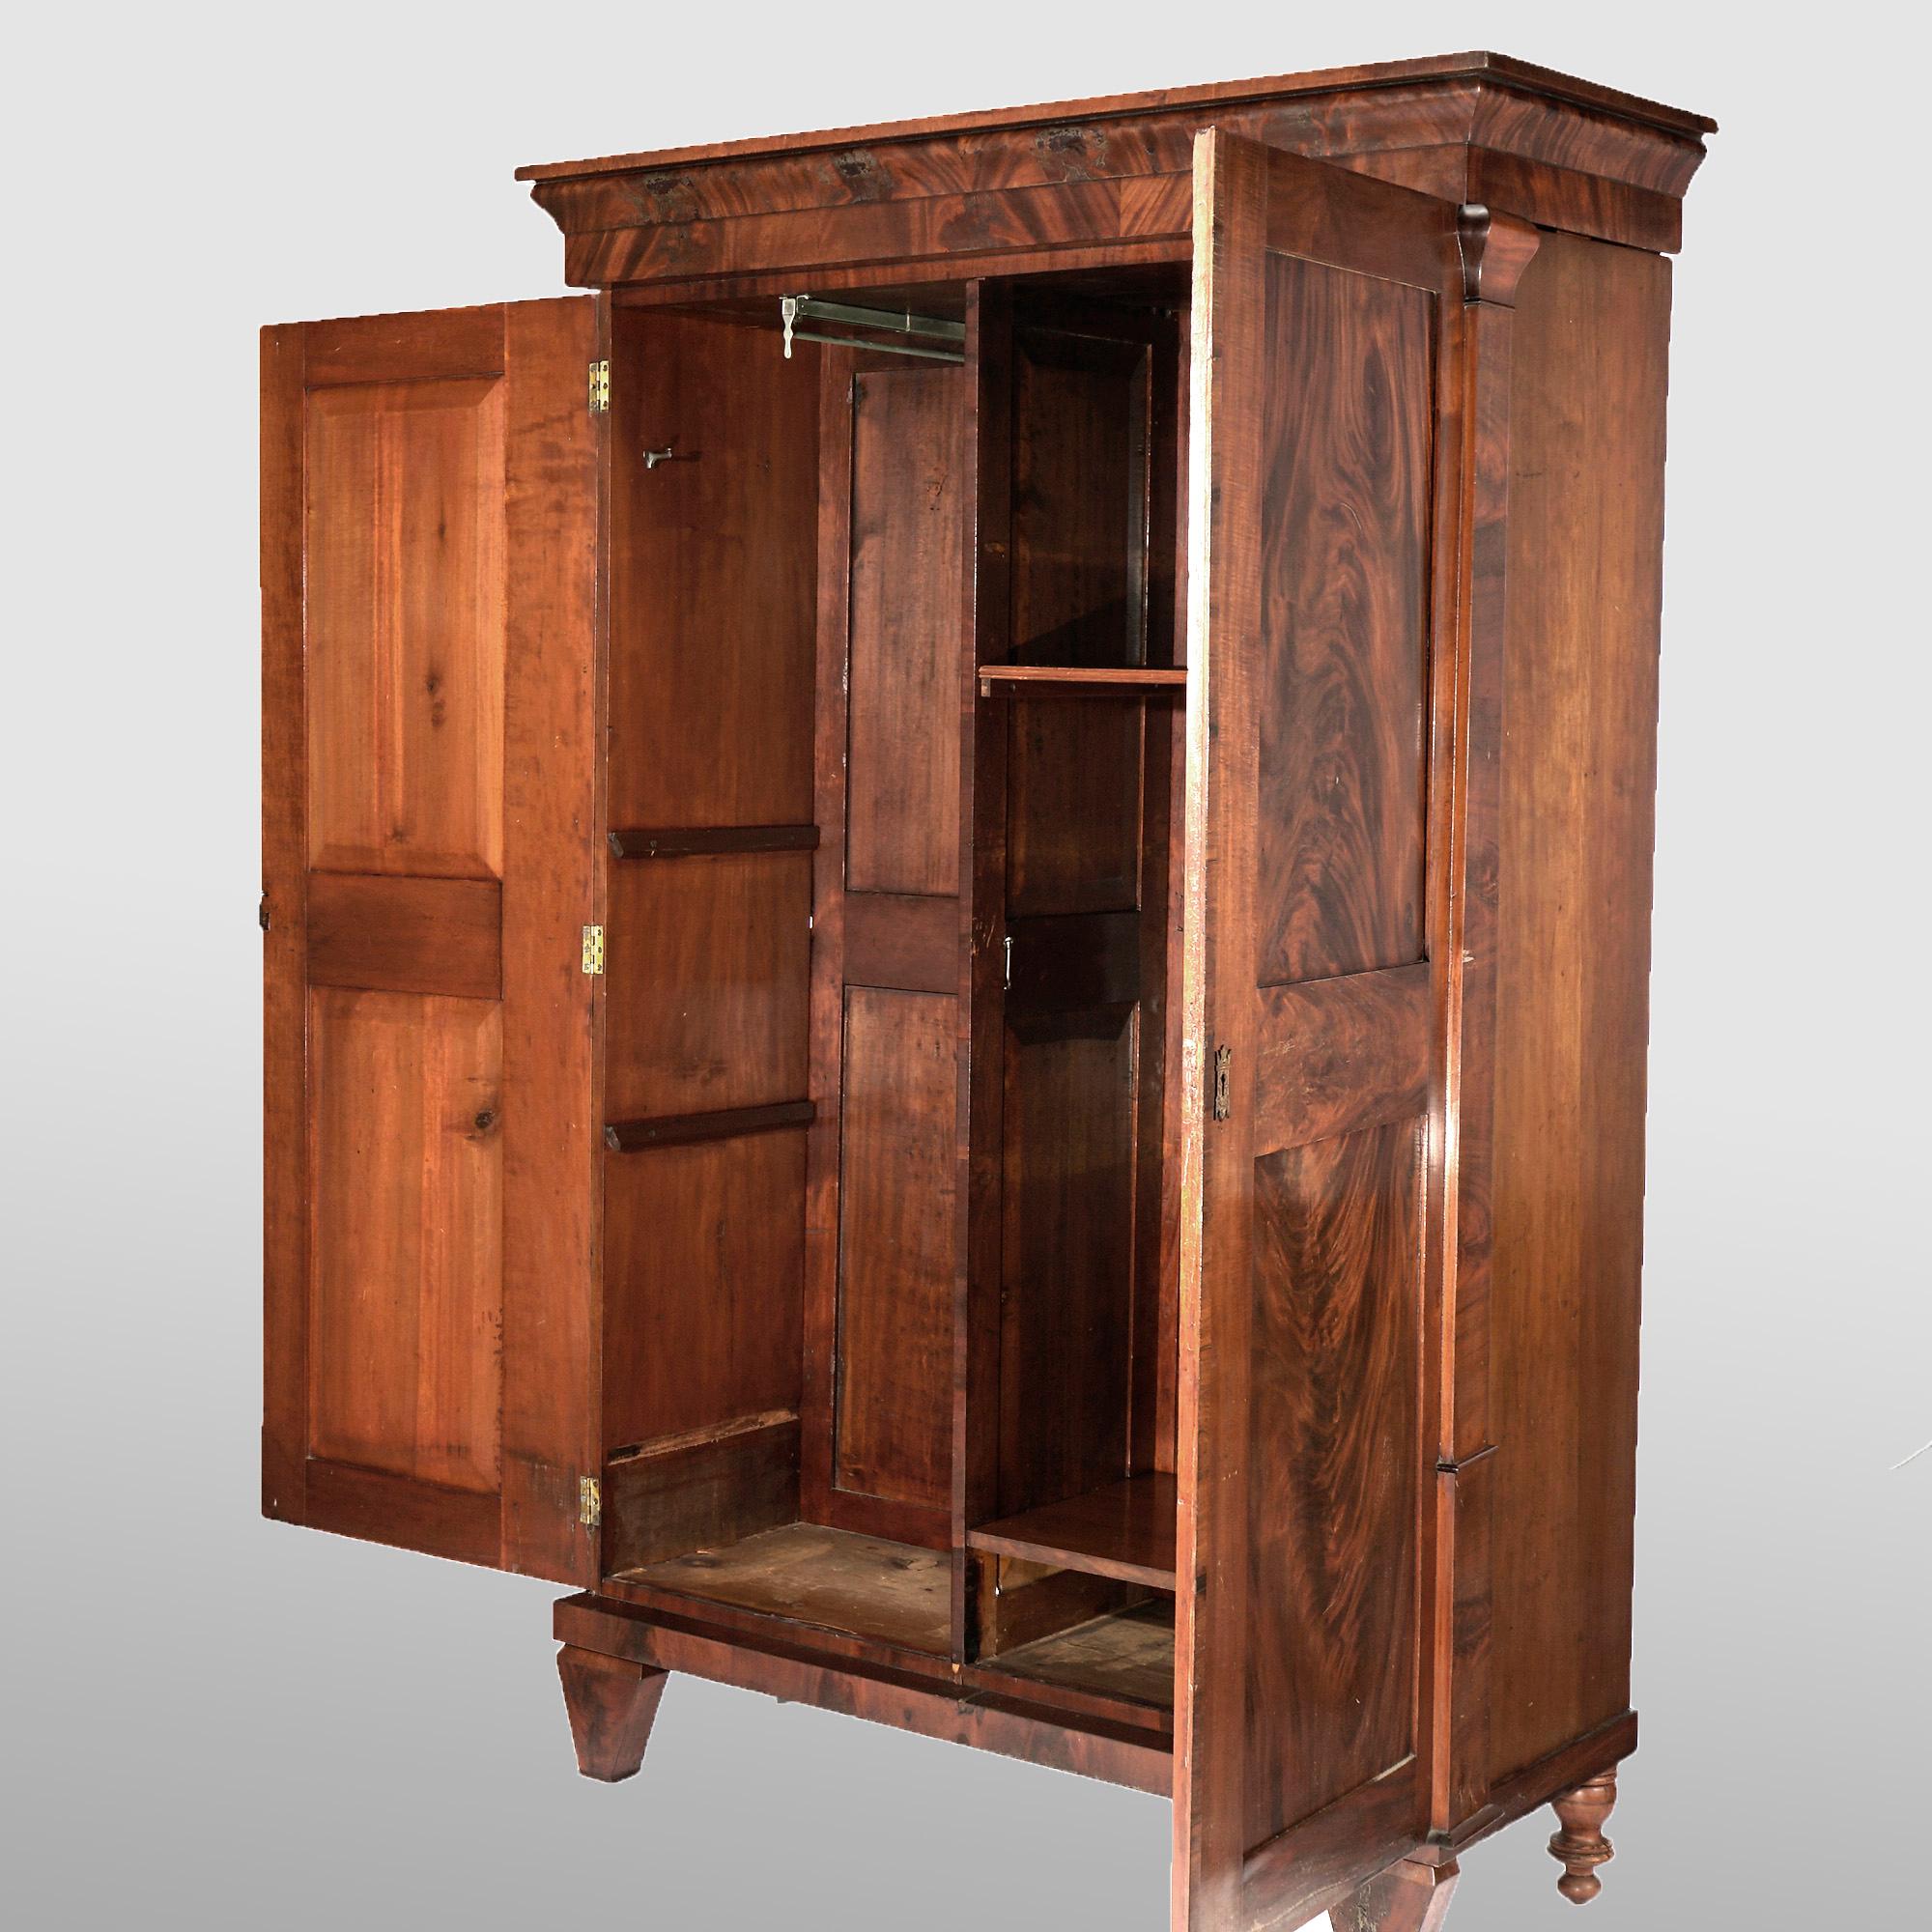 An antique American Empire armoire offers paneled flame mahogany construction with case having double doors opening to a divided interior with shelves and a clothes bar, flanking stylized column supports and raised on square and tapered squat legs,